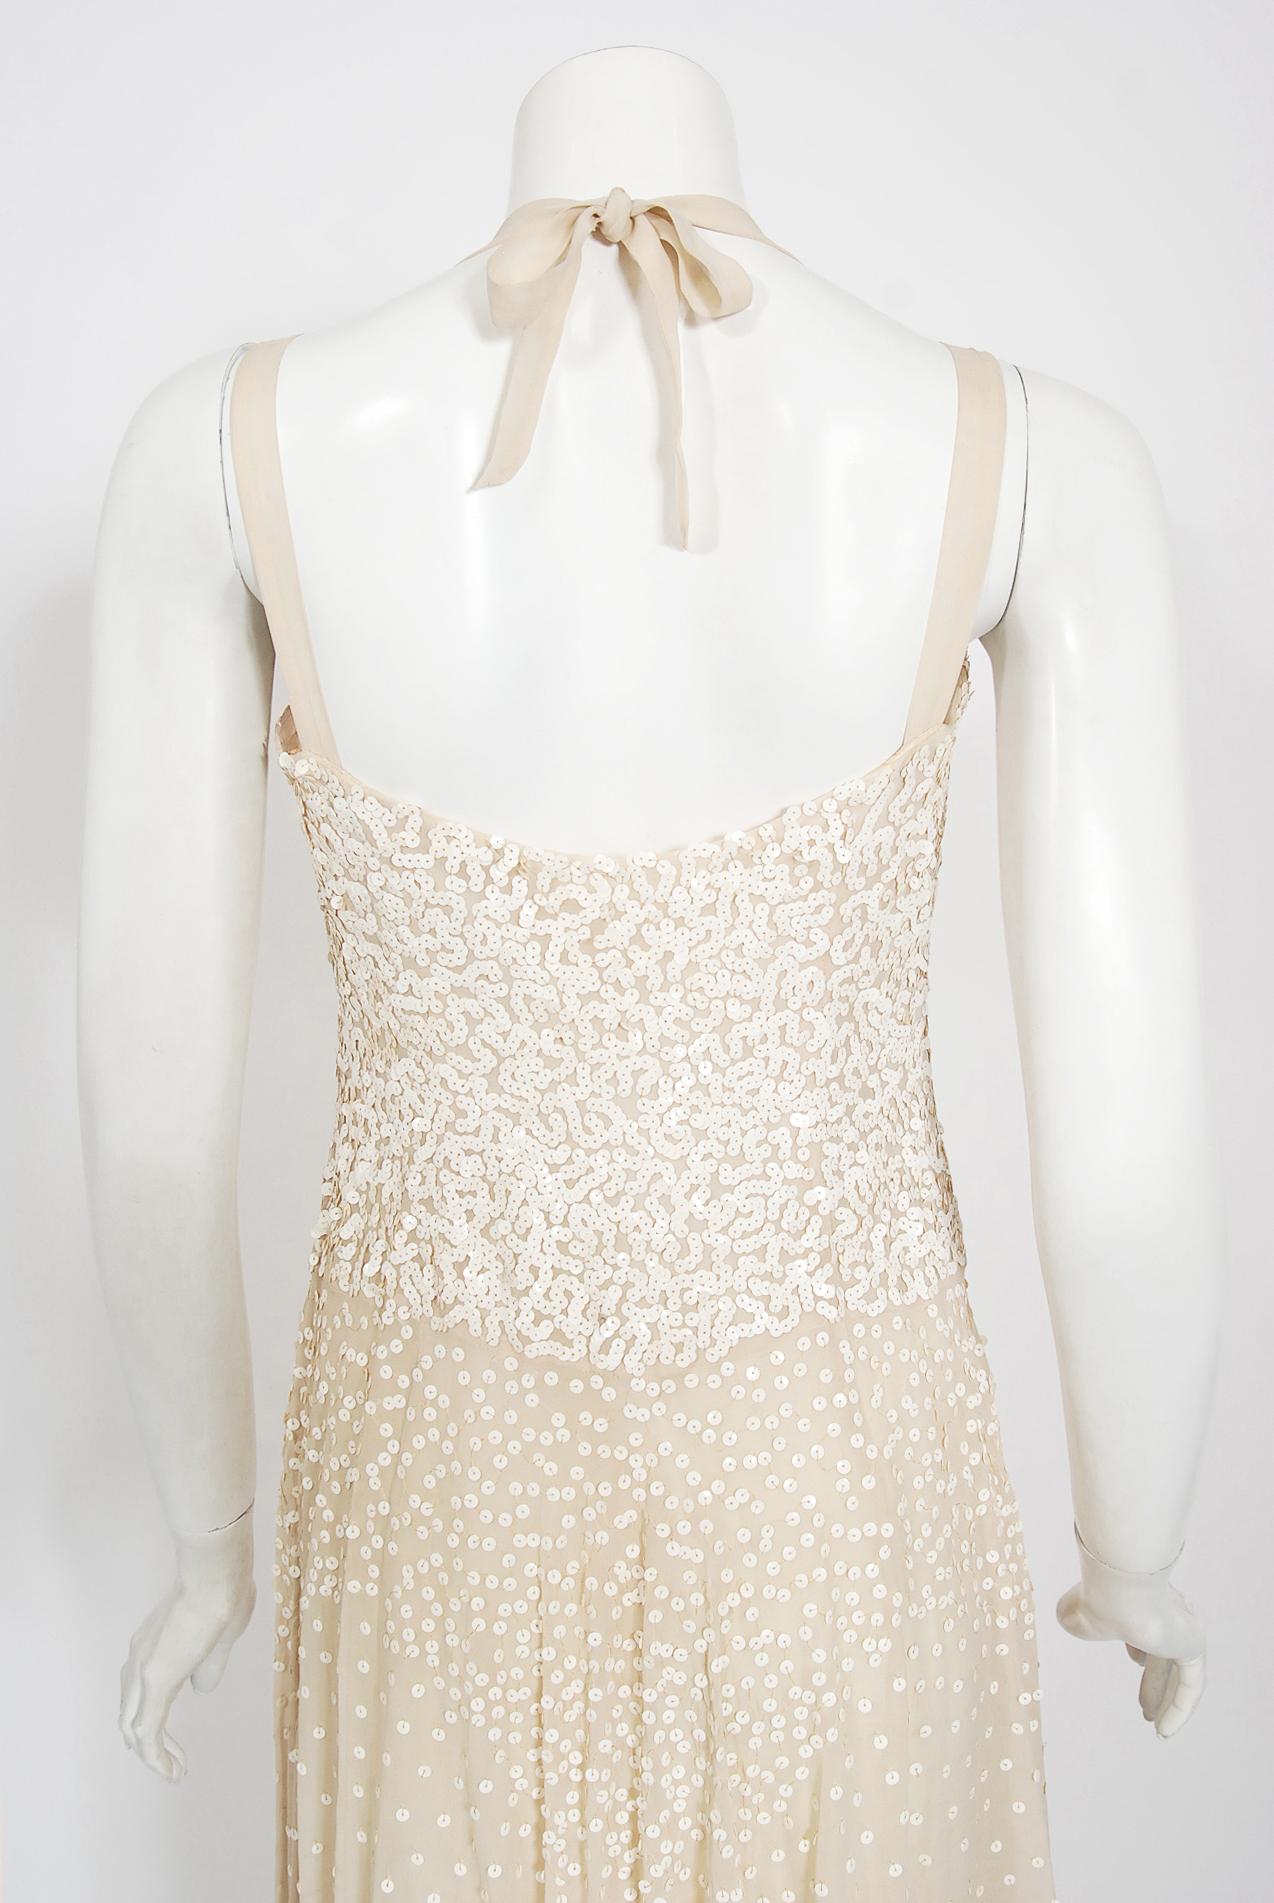 Vintage 1940's Harry Cooper of Hollywood Ivory Sequin Chiffon Halter Bridal Gown For Sale 3